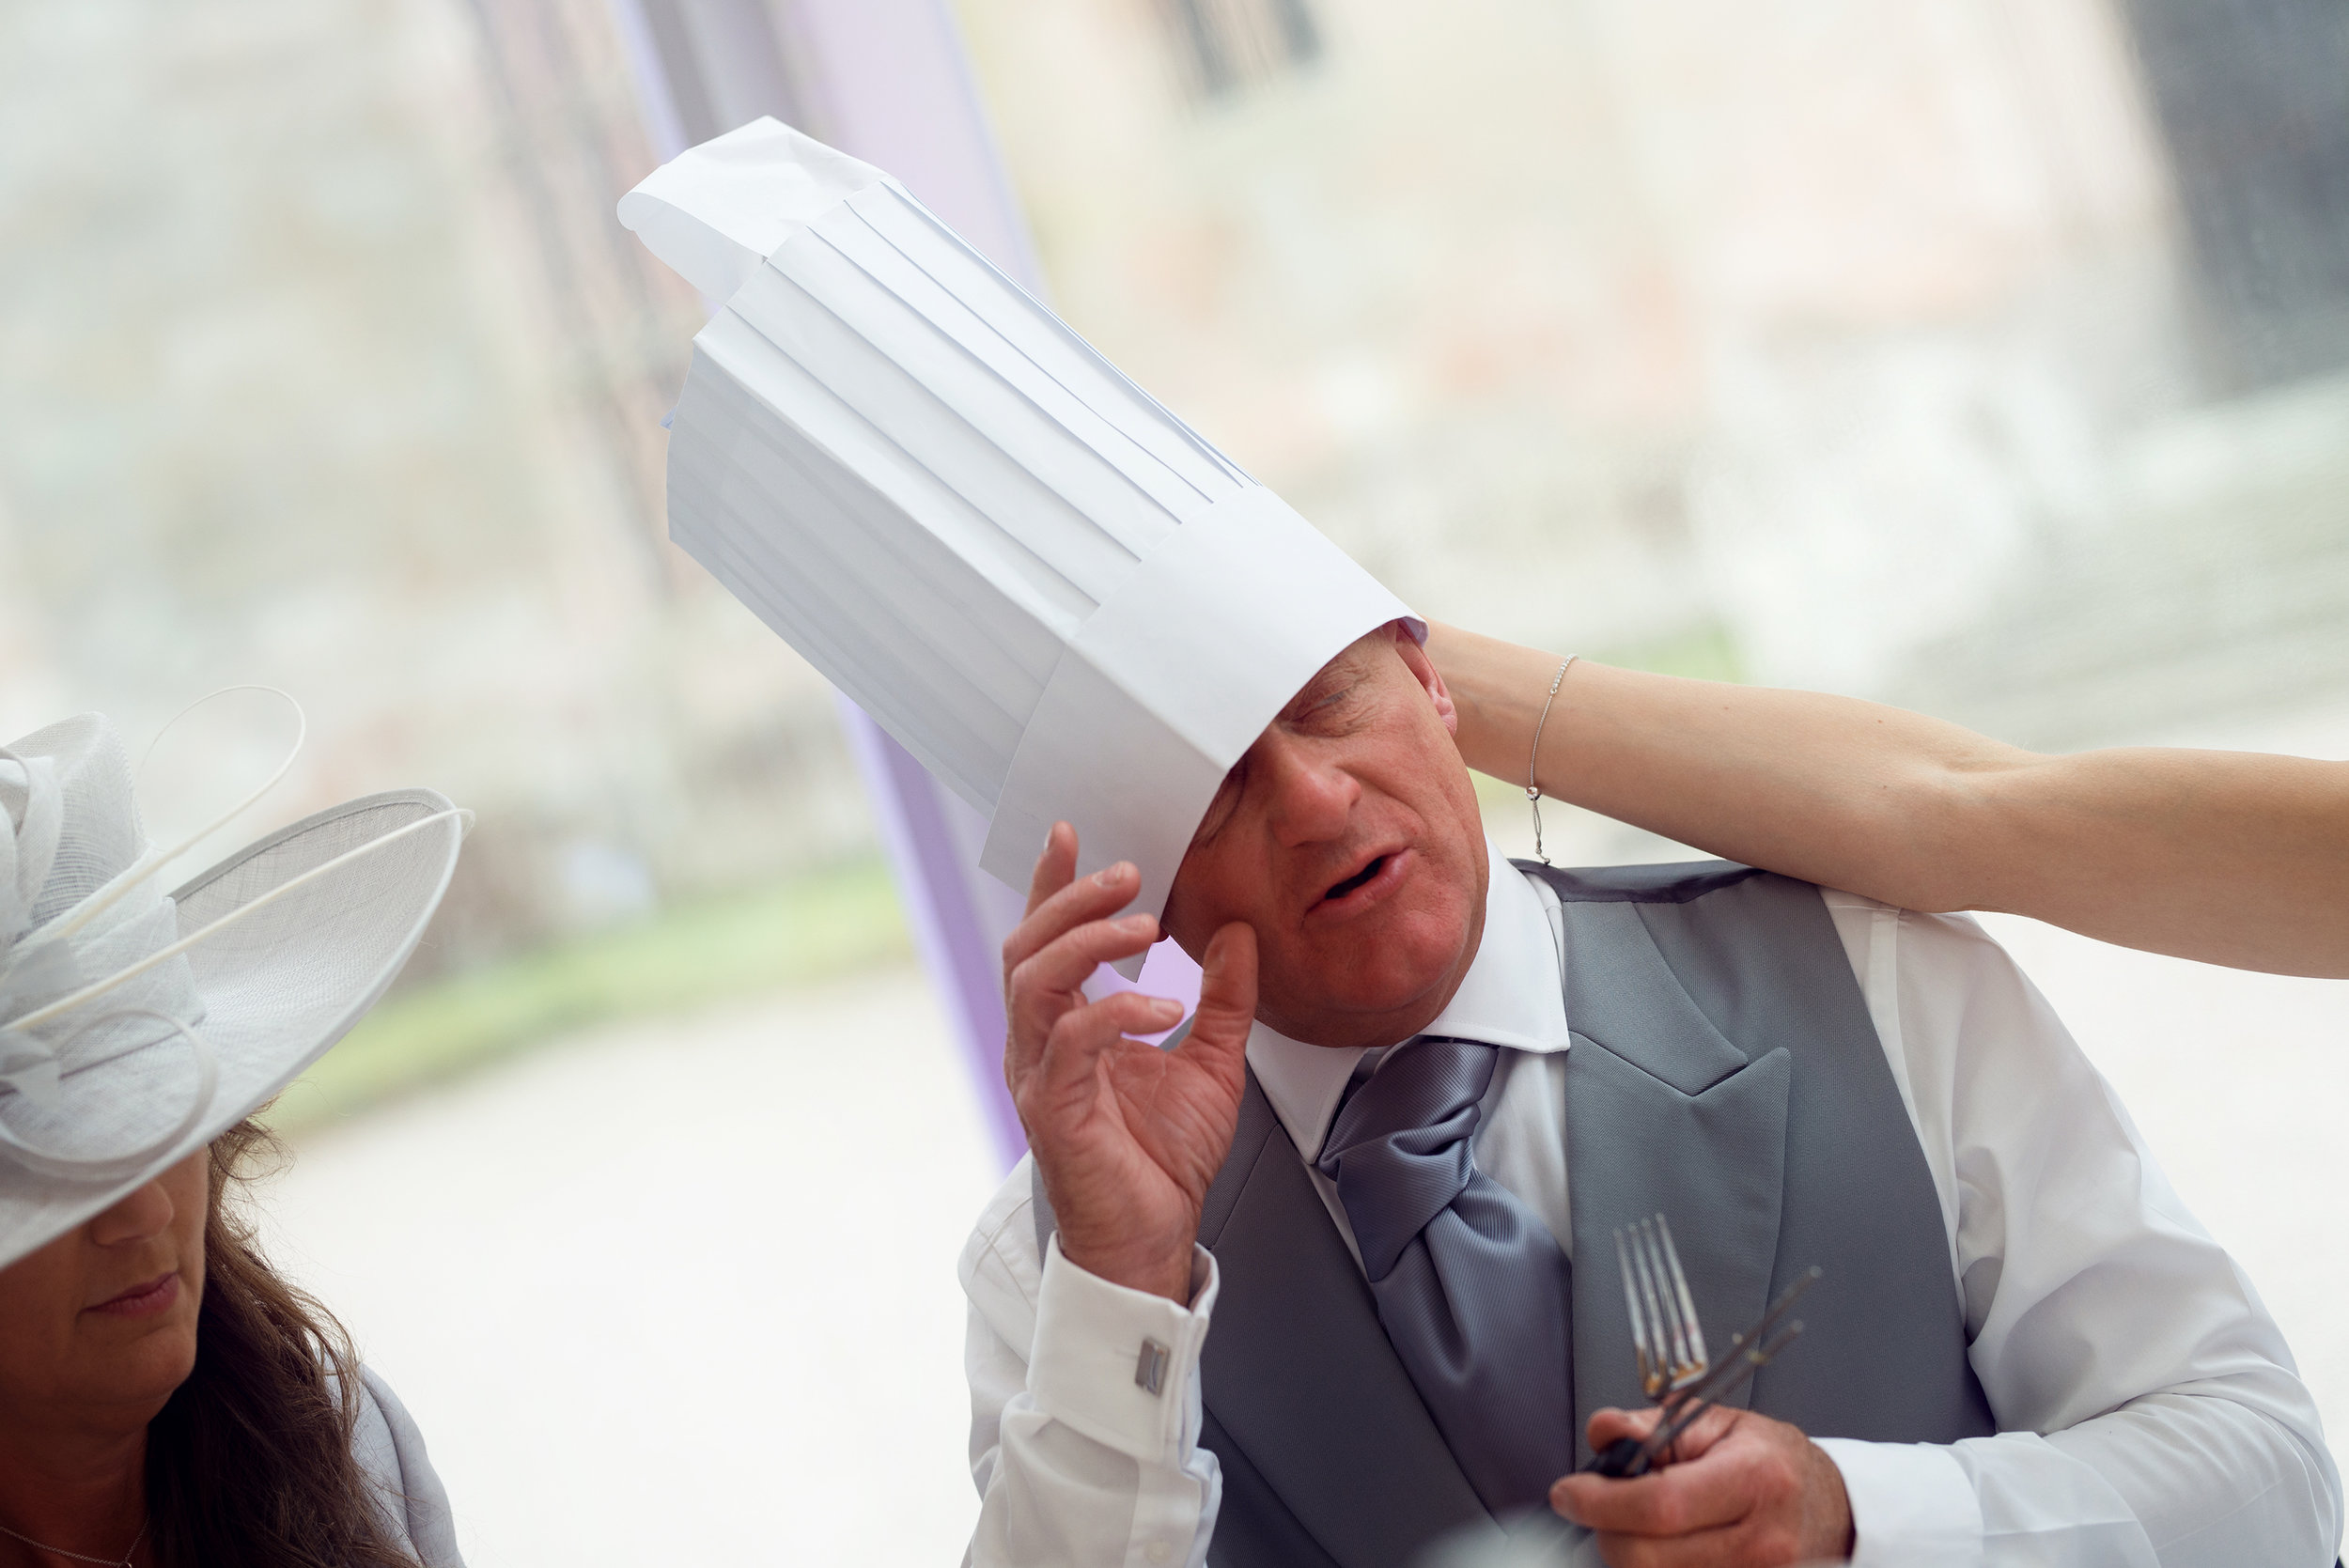 The brides father trying to keep his chefs hat on